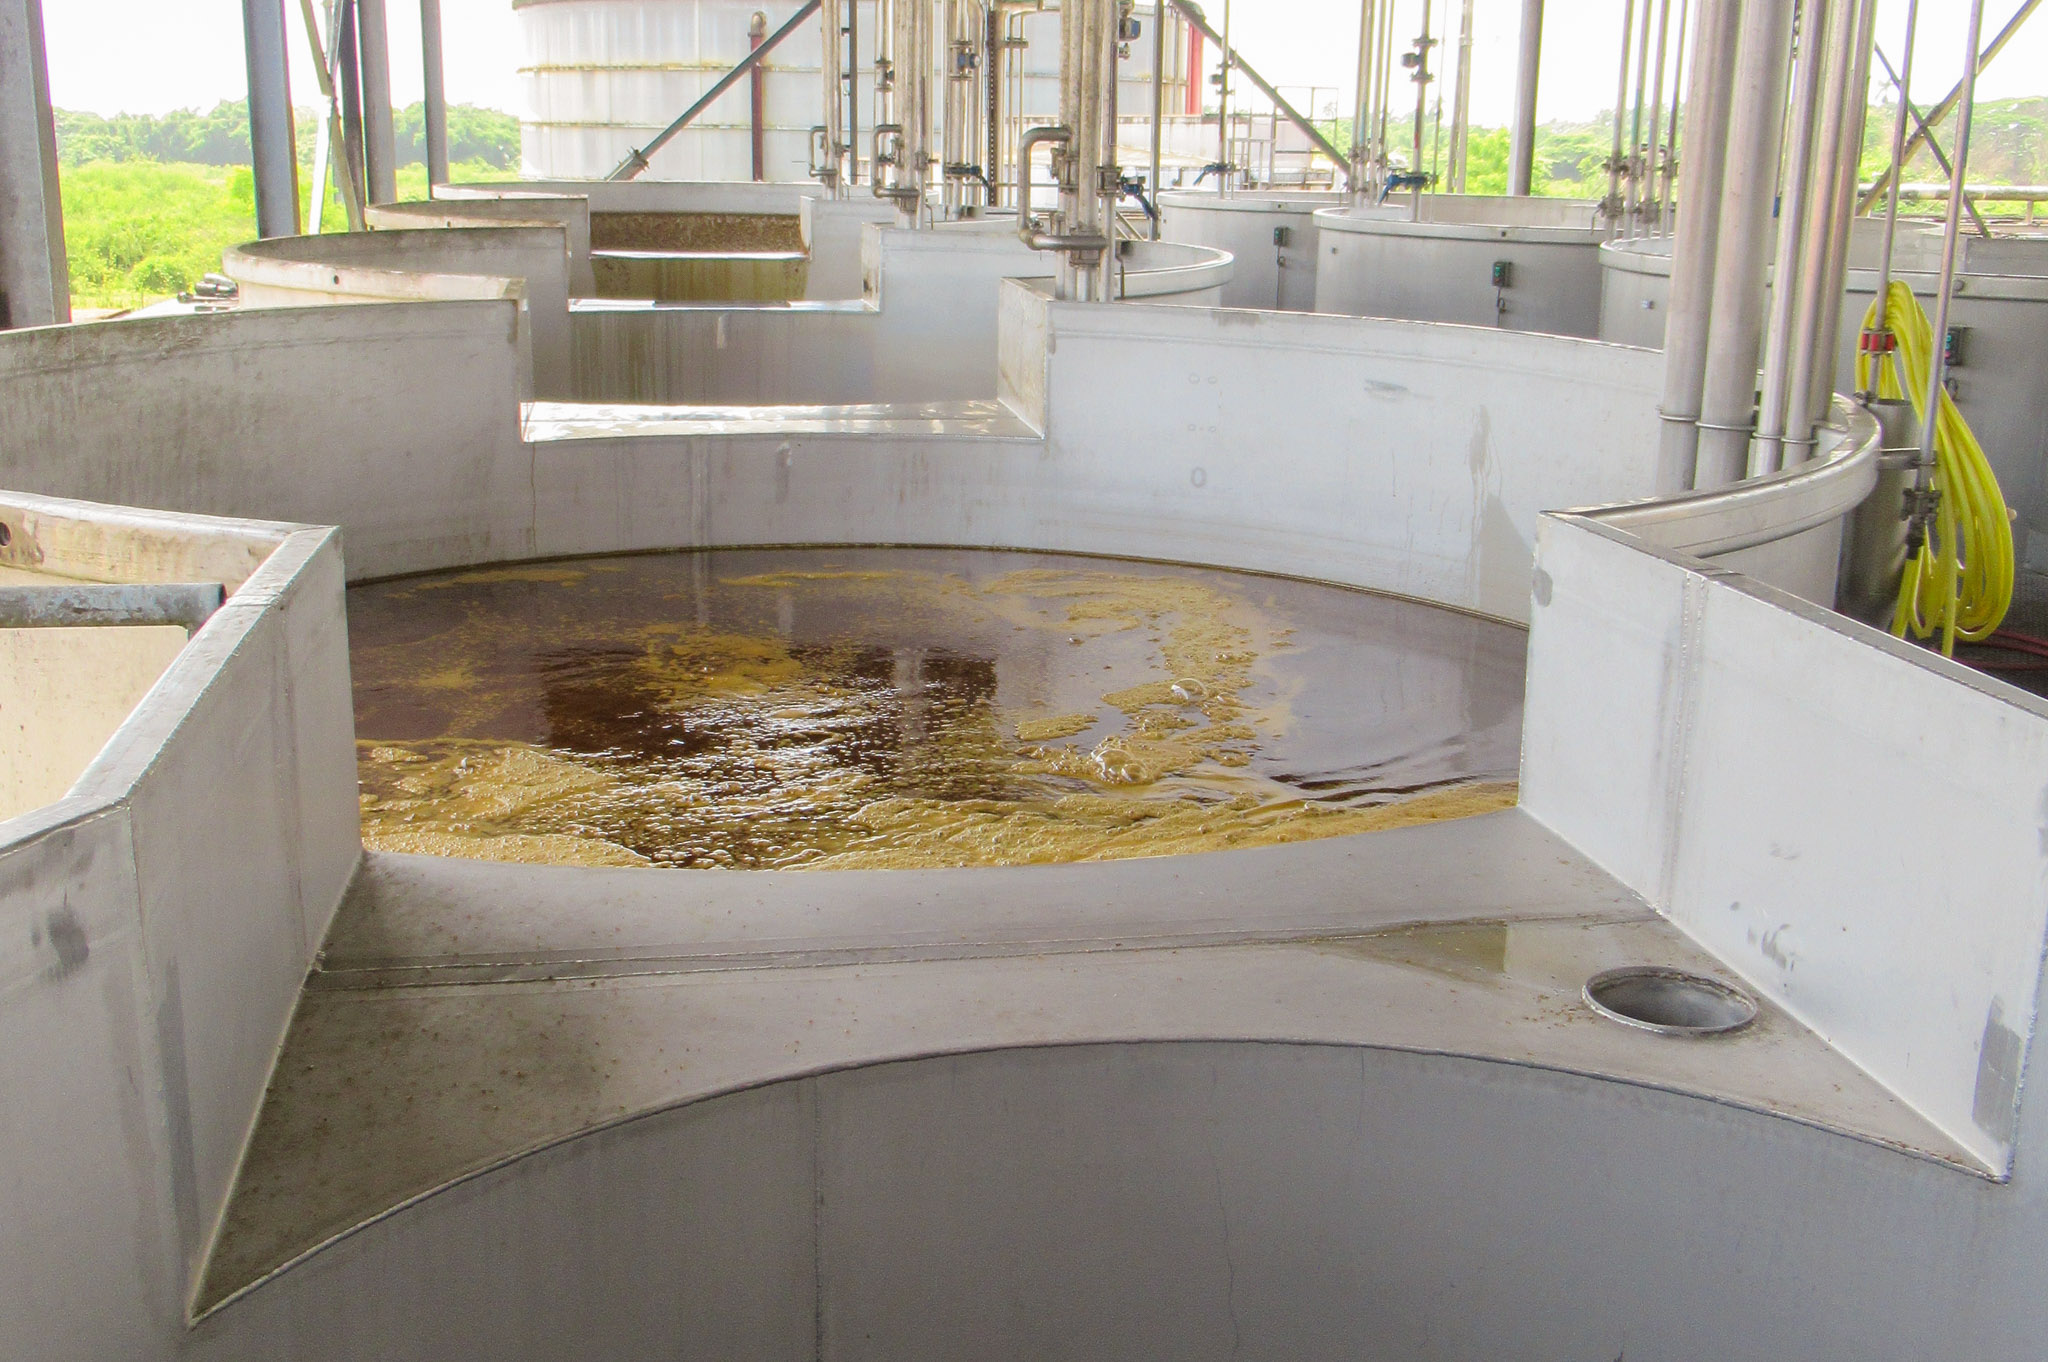 concrete vats filled with fermenting liquid